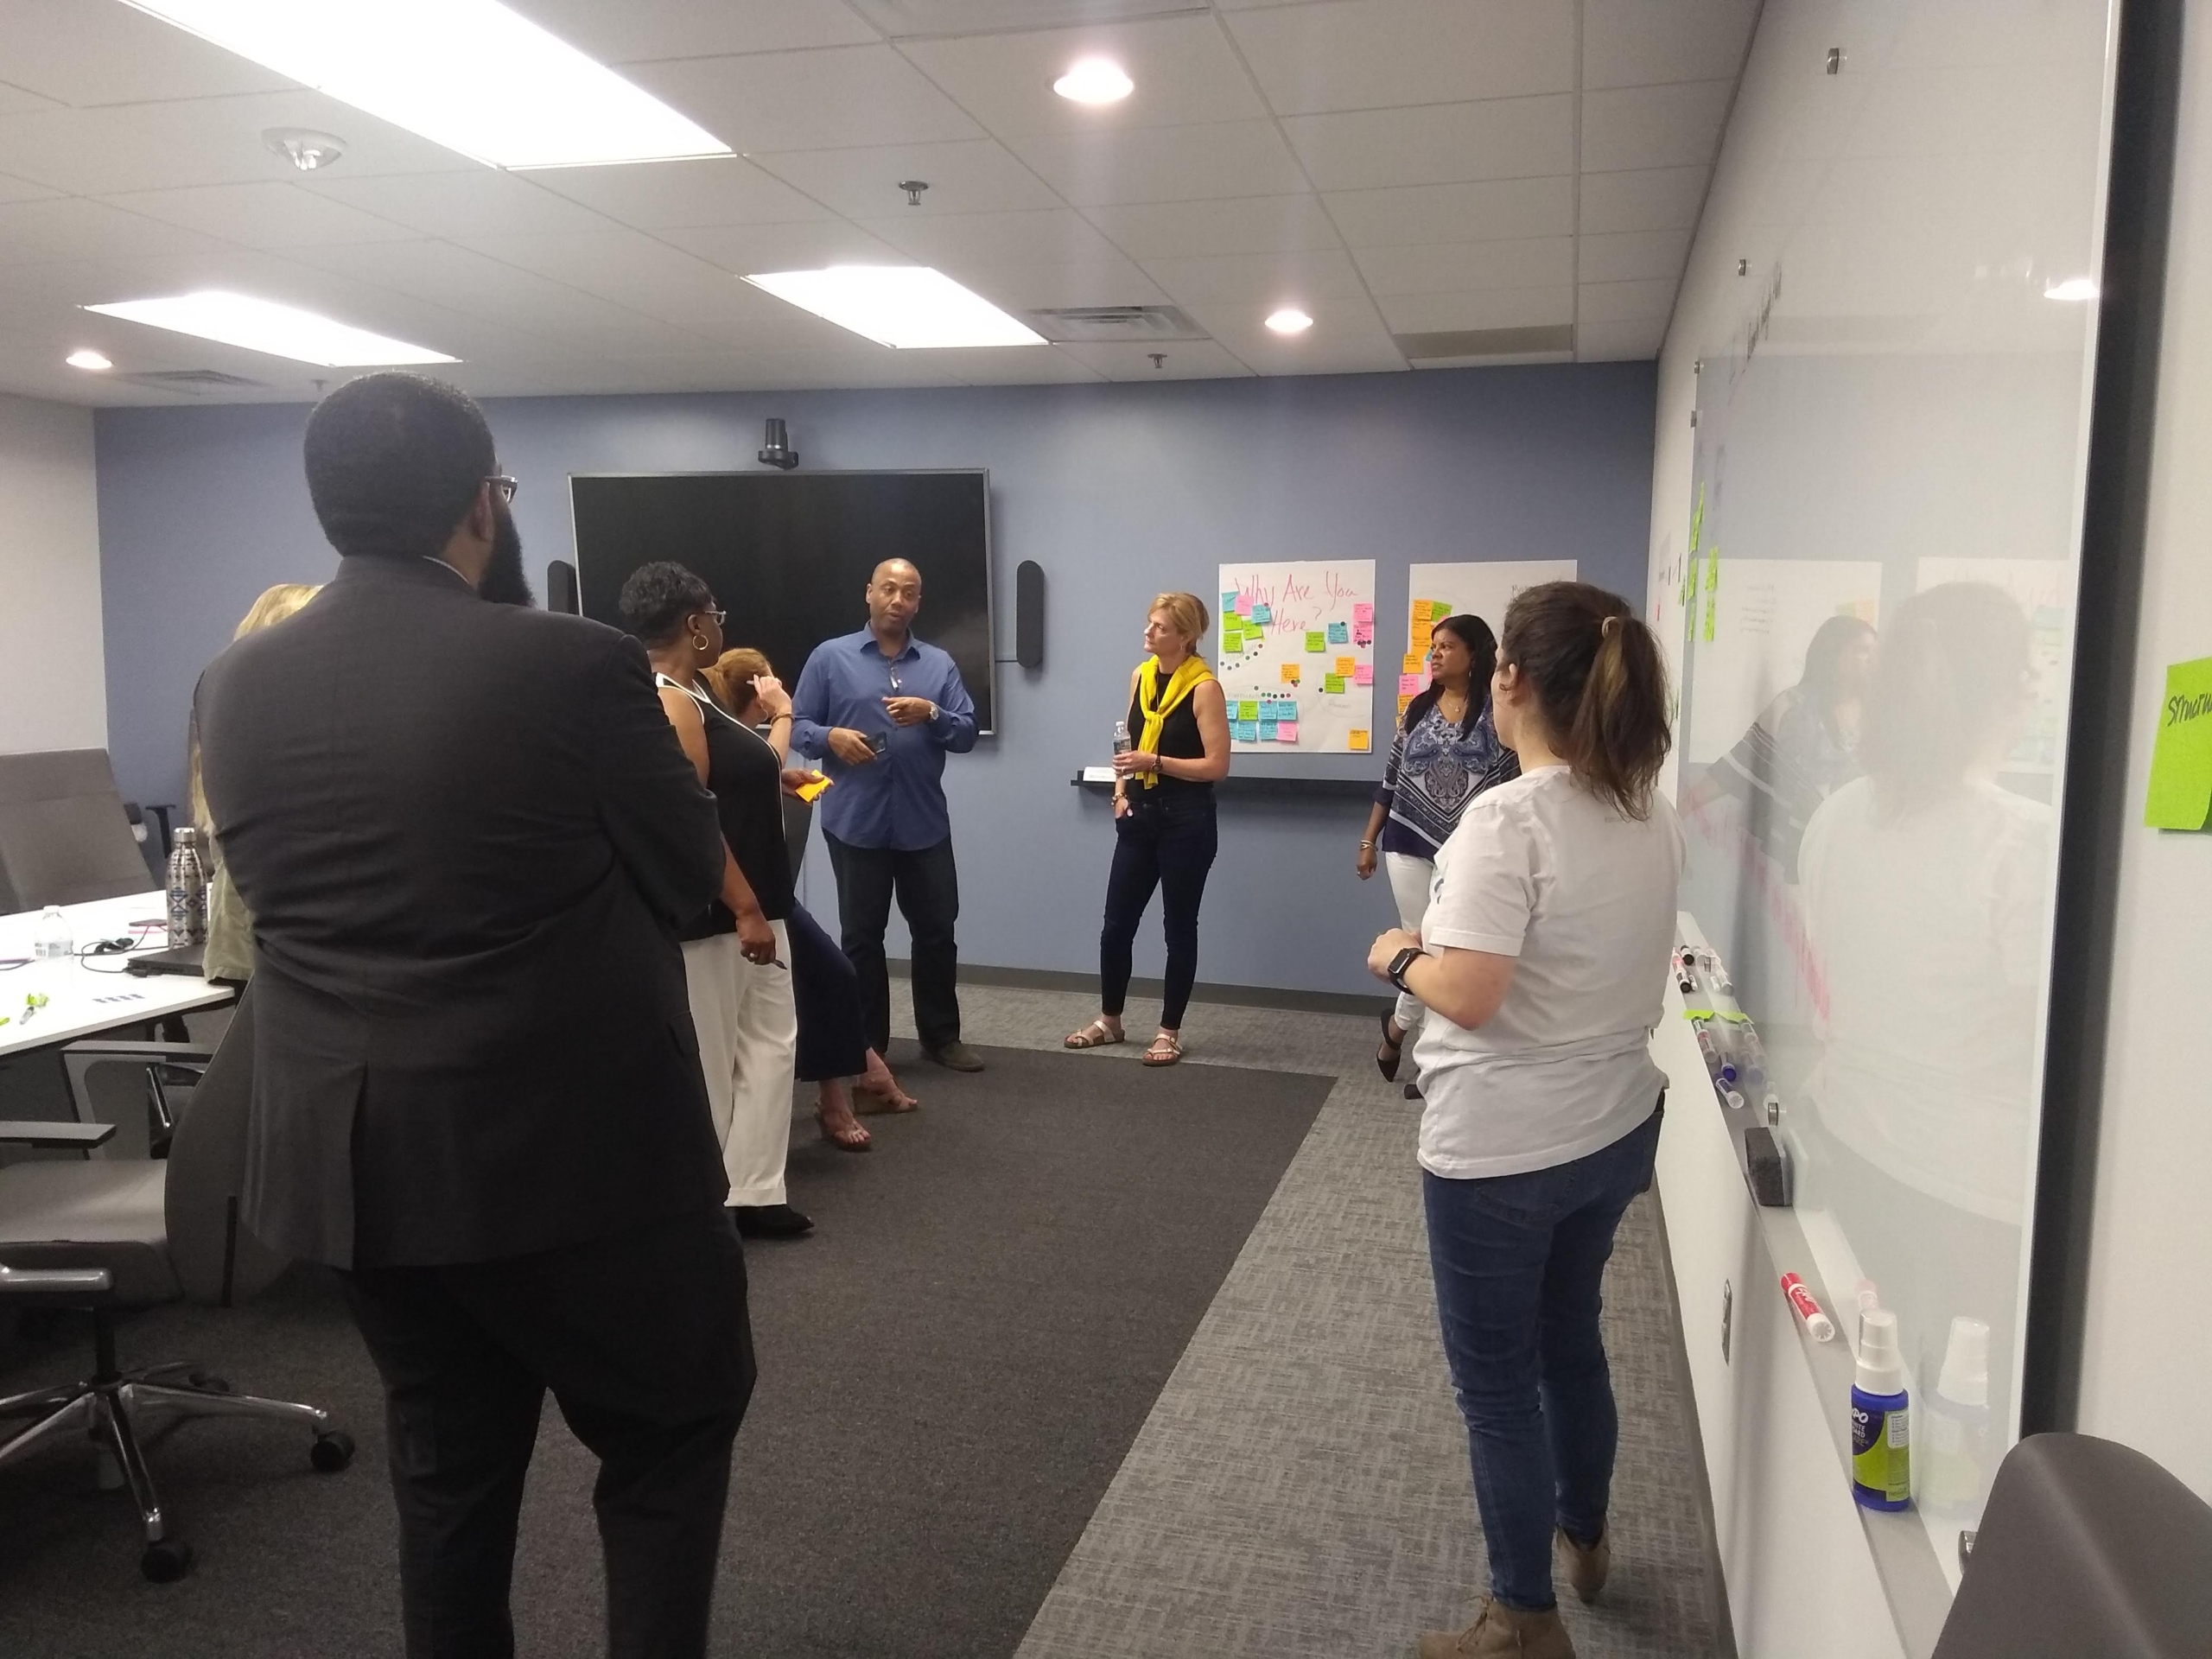 Seven people standing in a conference room talking in front of a whiteboard with sticky notes.